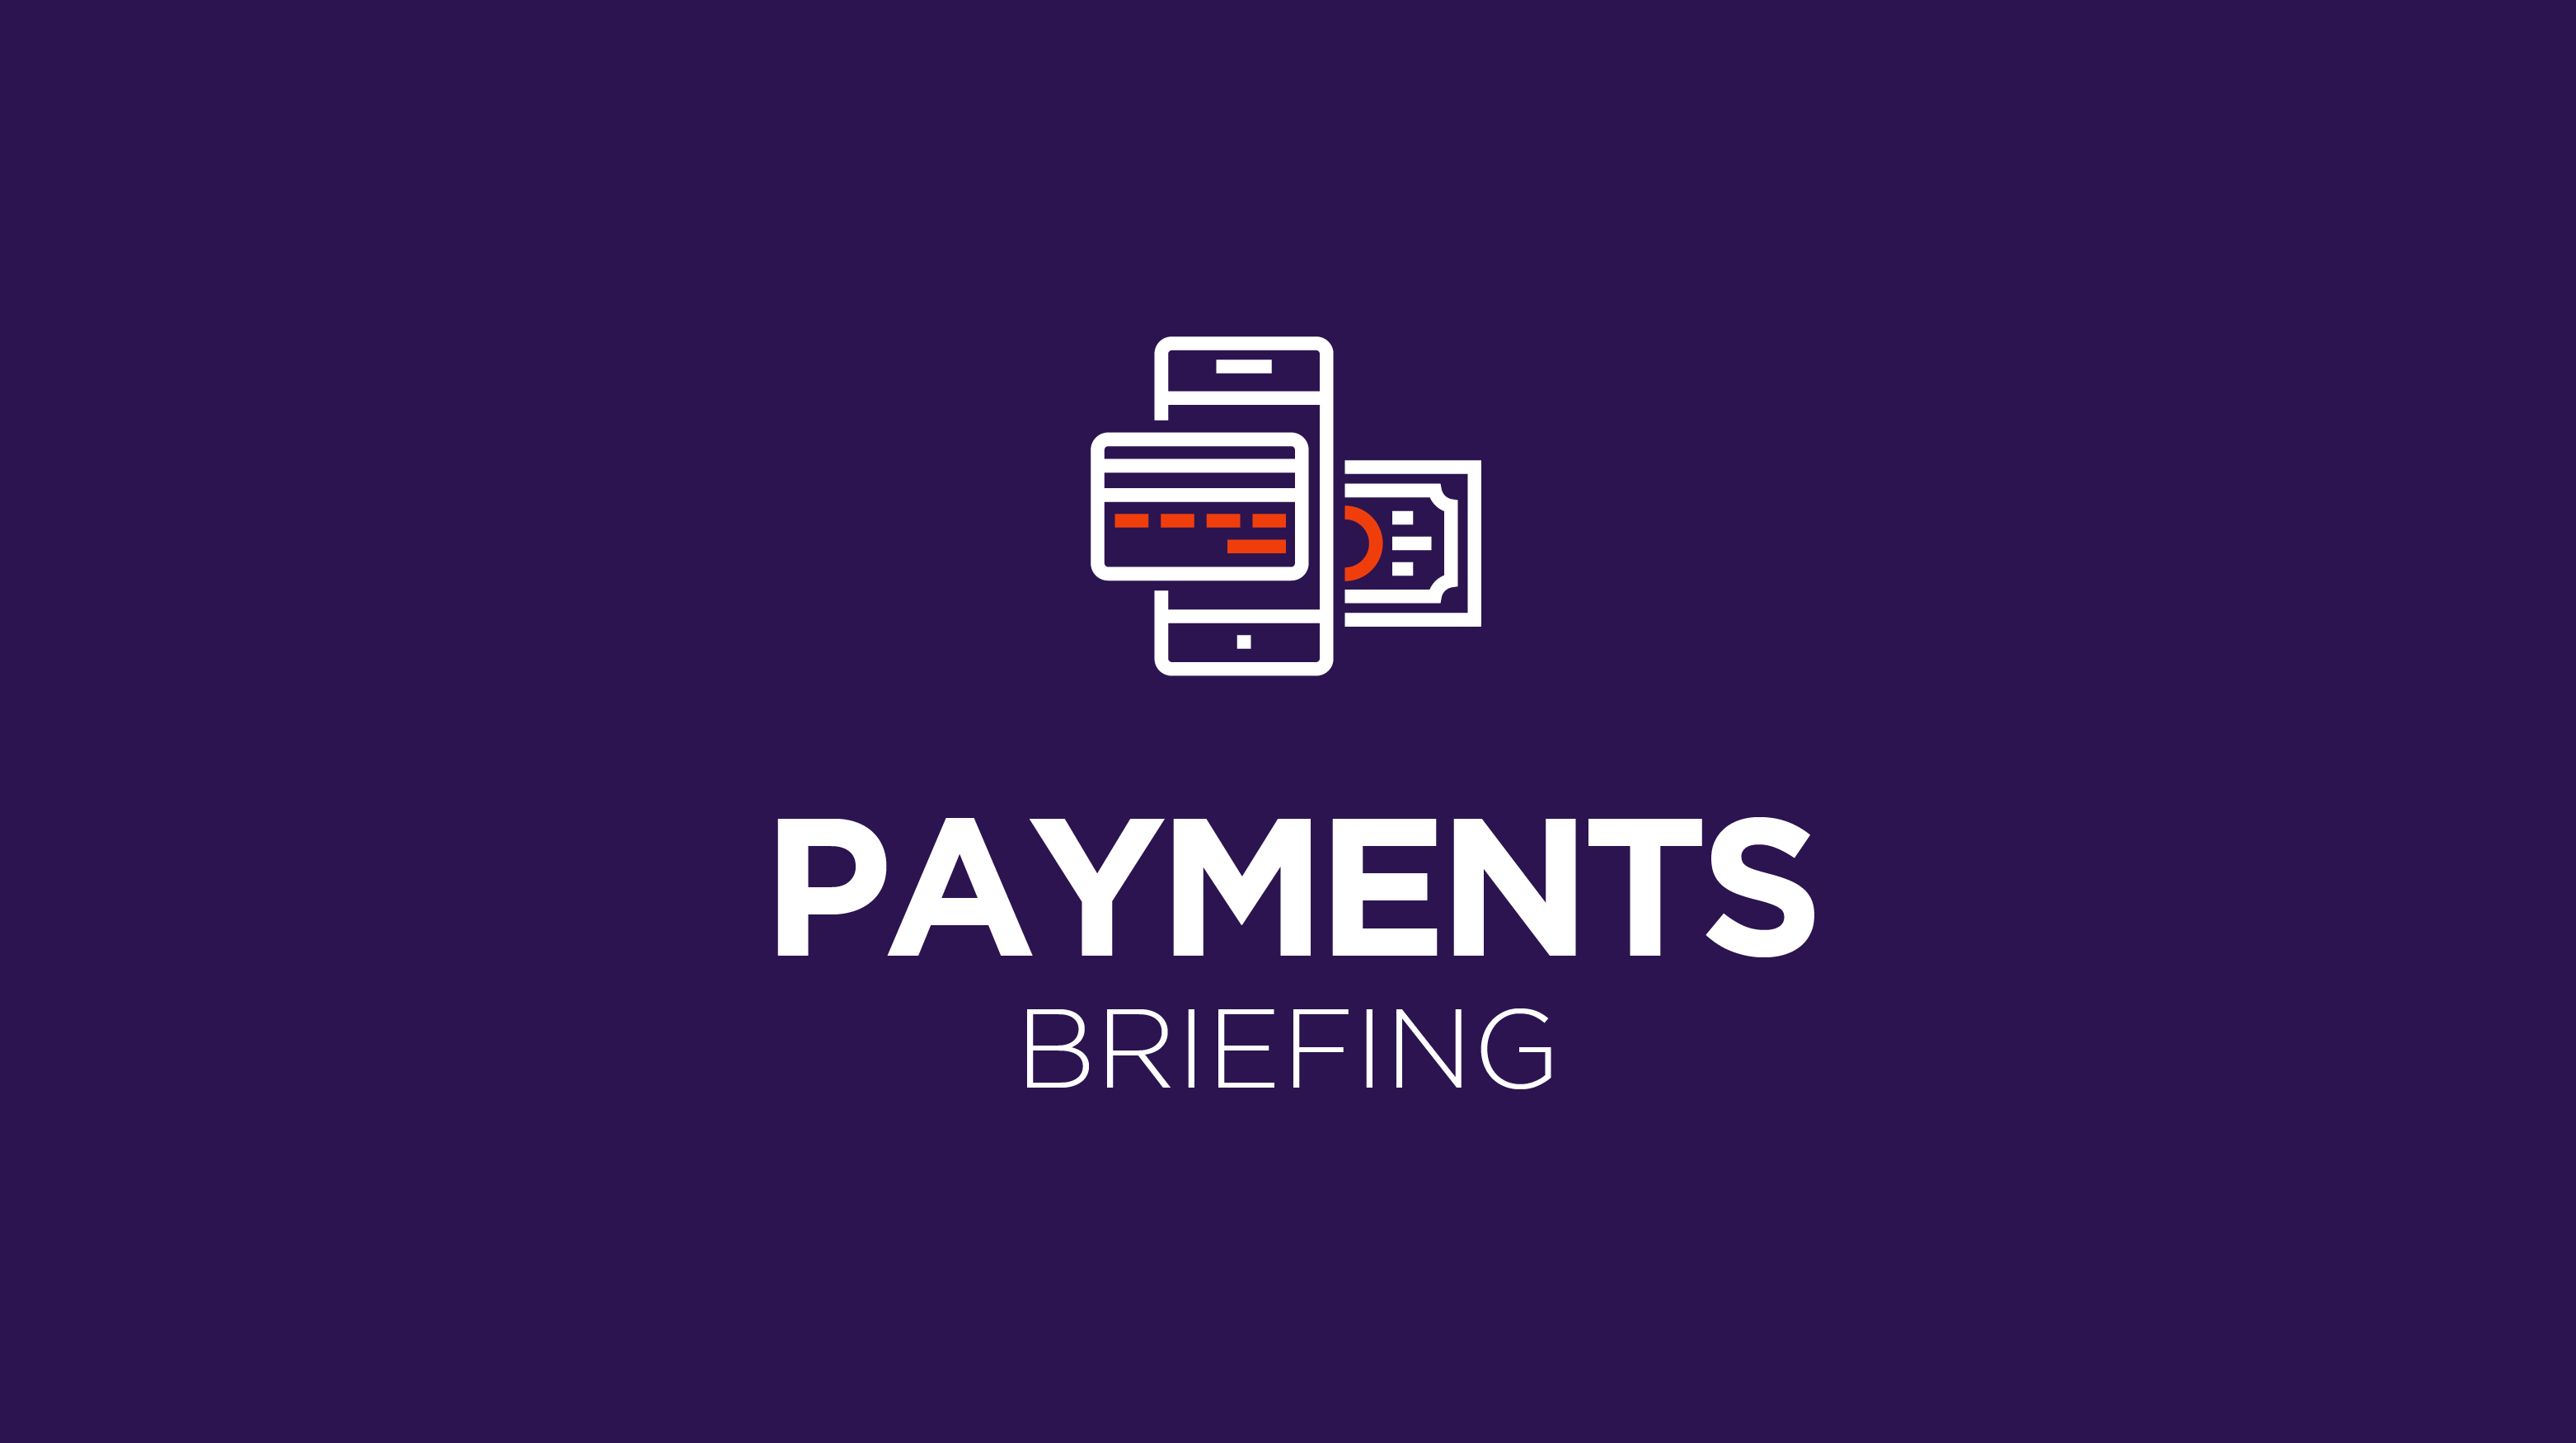 Payments Briefing: What we know so far about Twitter’s payments plans